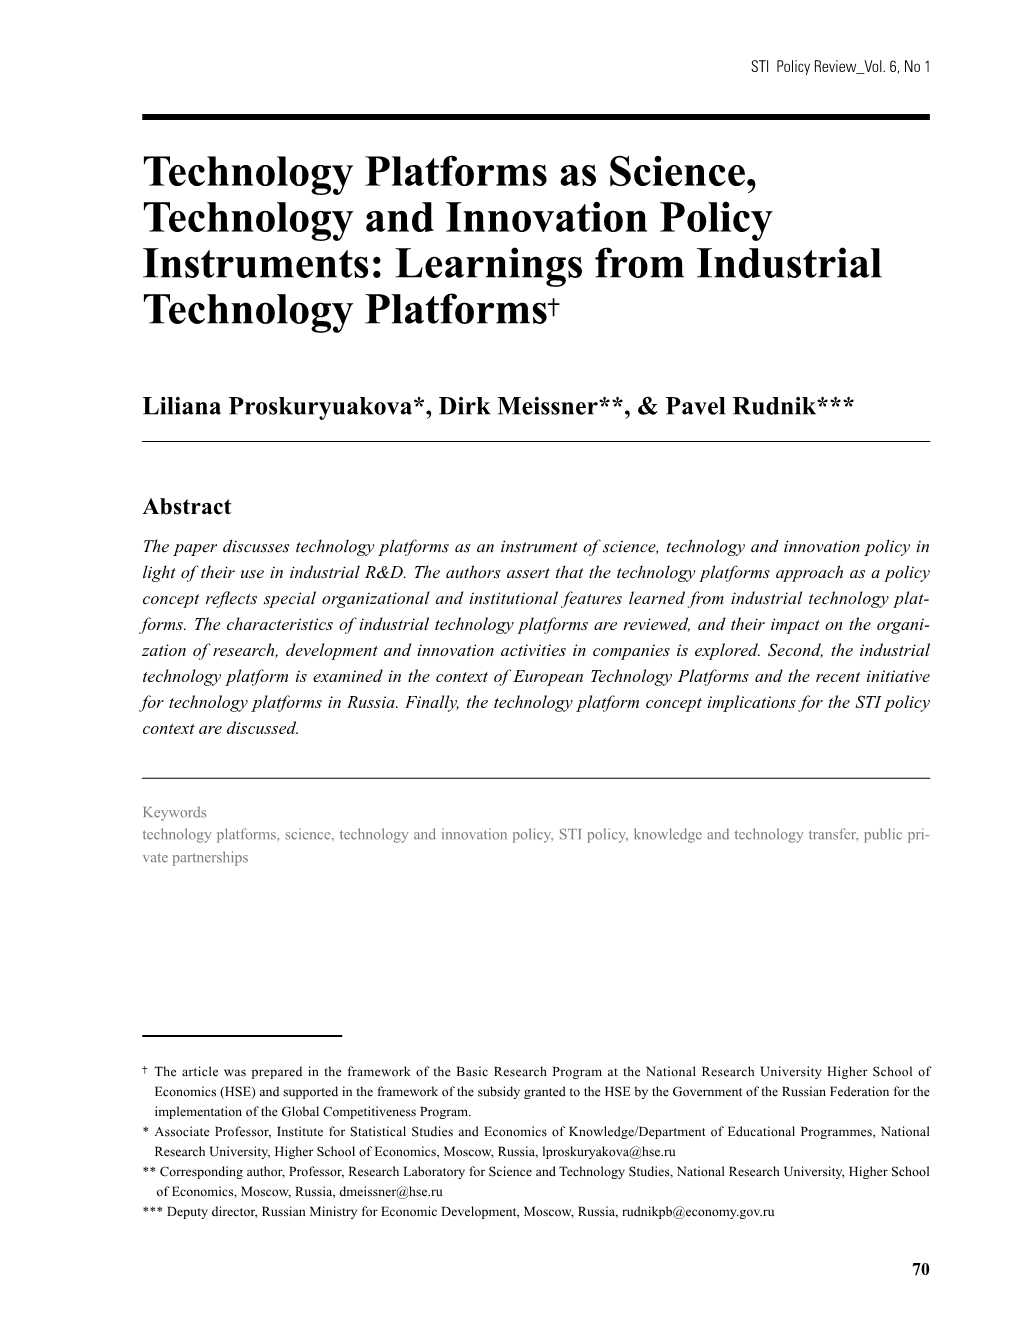 Technology Platforms As Science, Technology and Innovation Policy Instruments: Learnings from Industrial Technology Platforms